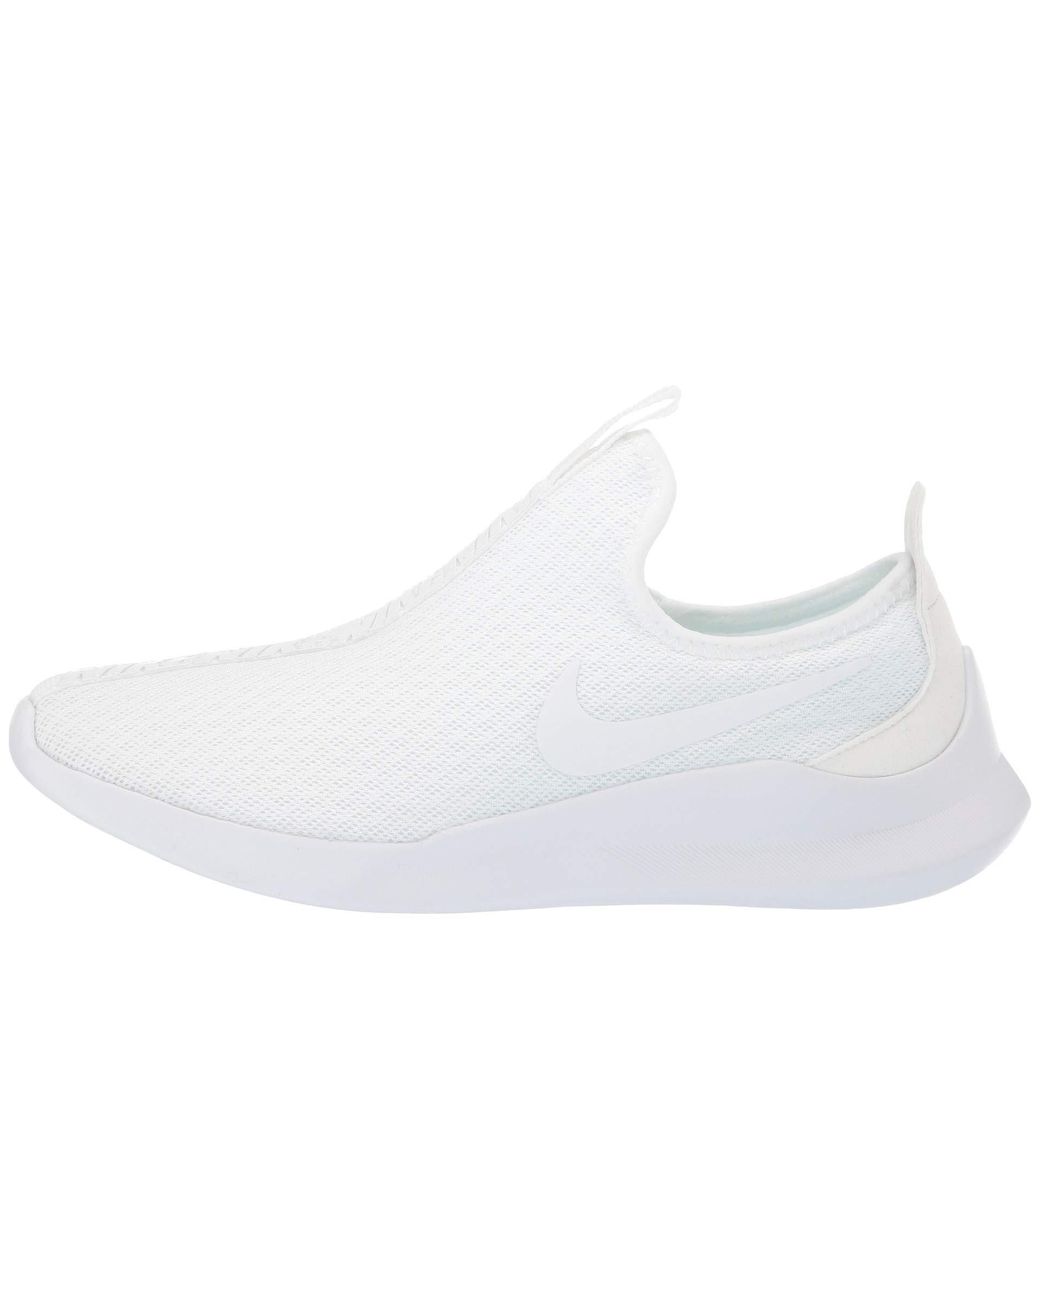 Nike Viale Slip-on (white/white) Classic Shoes | Lyst